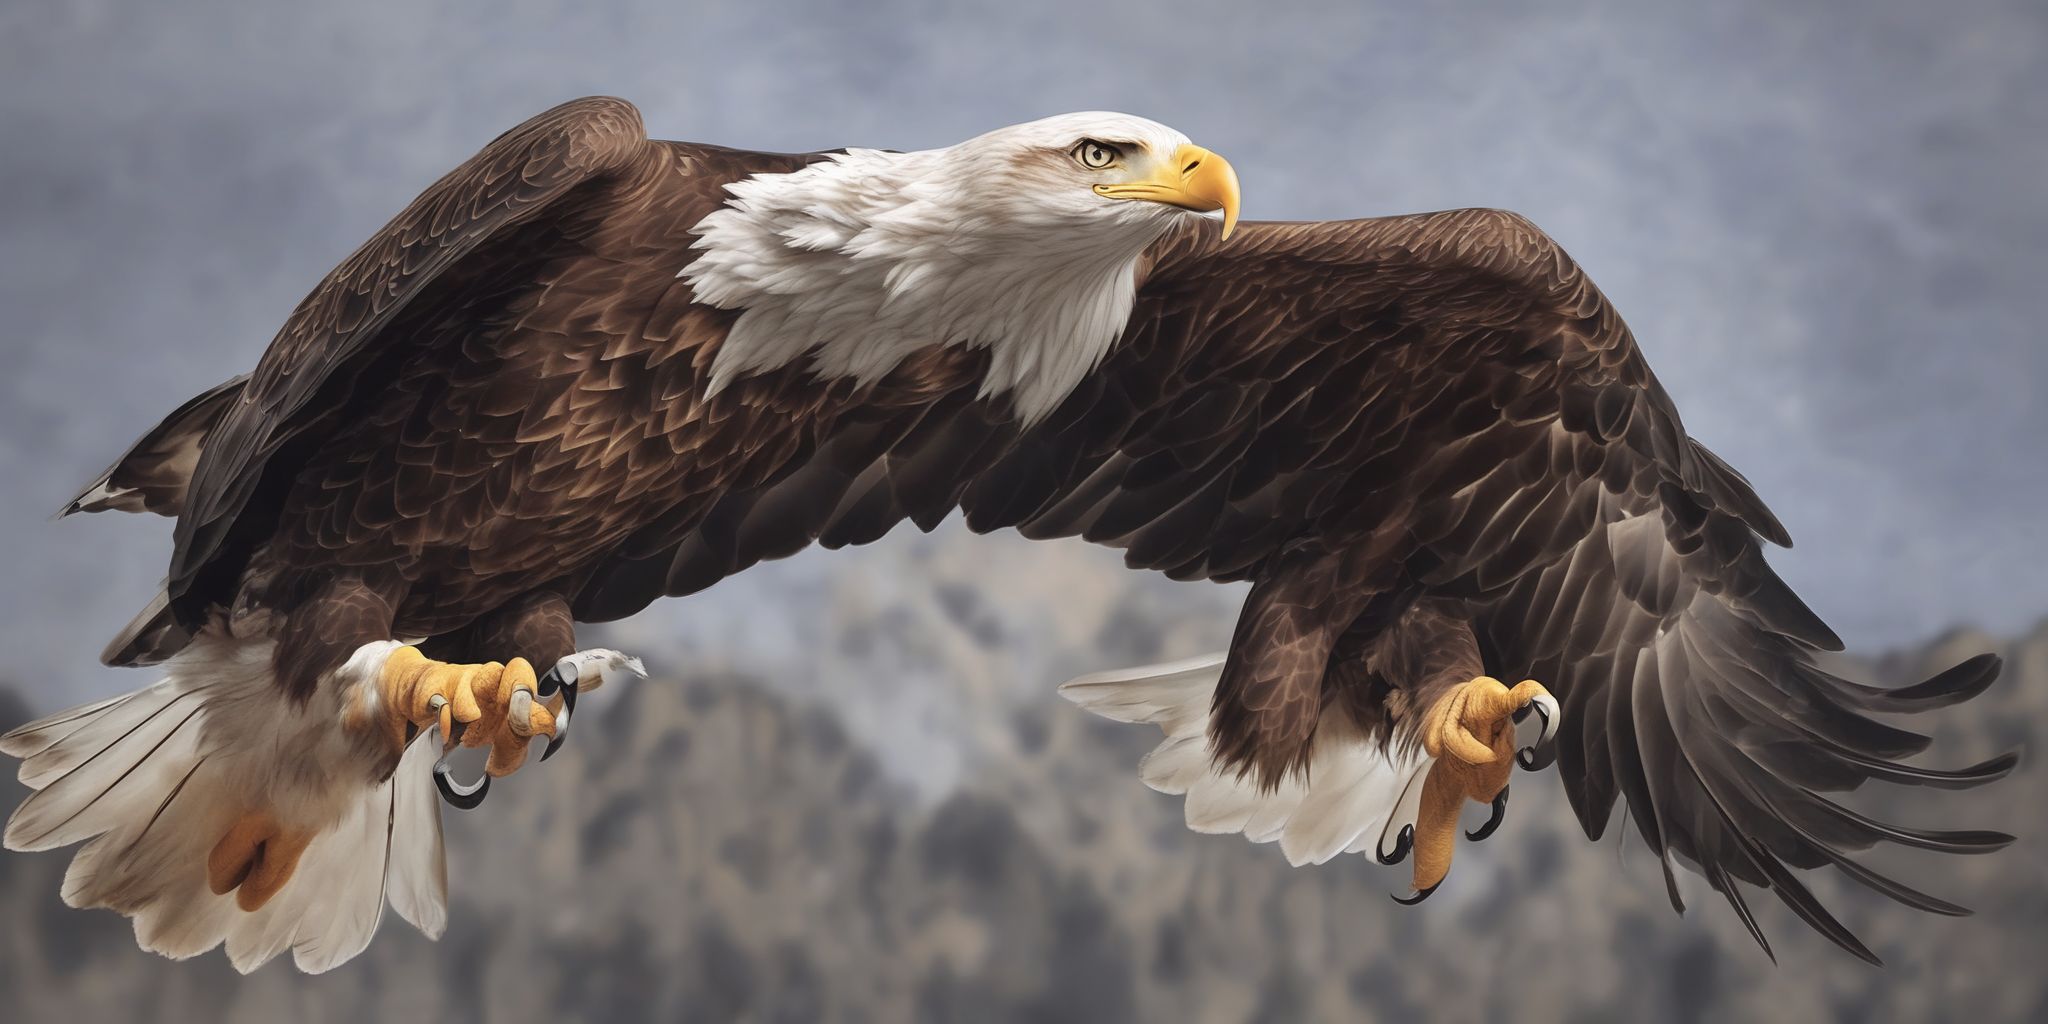 Eagle  in realistic, photographic style